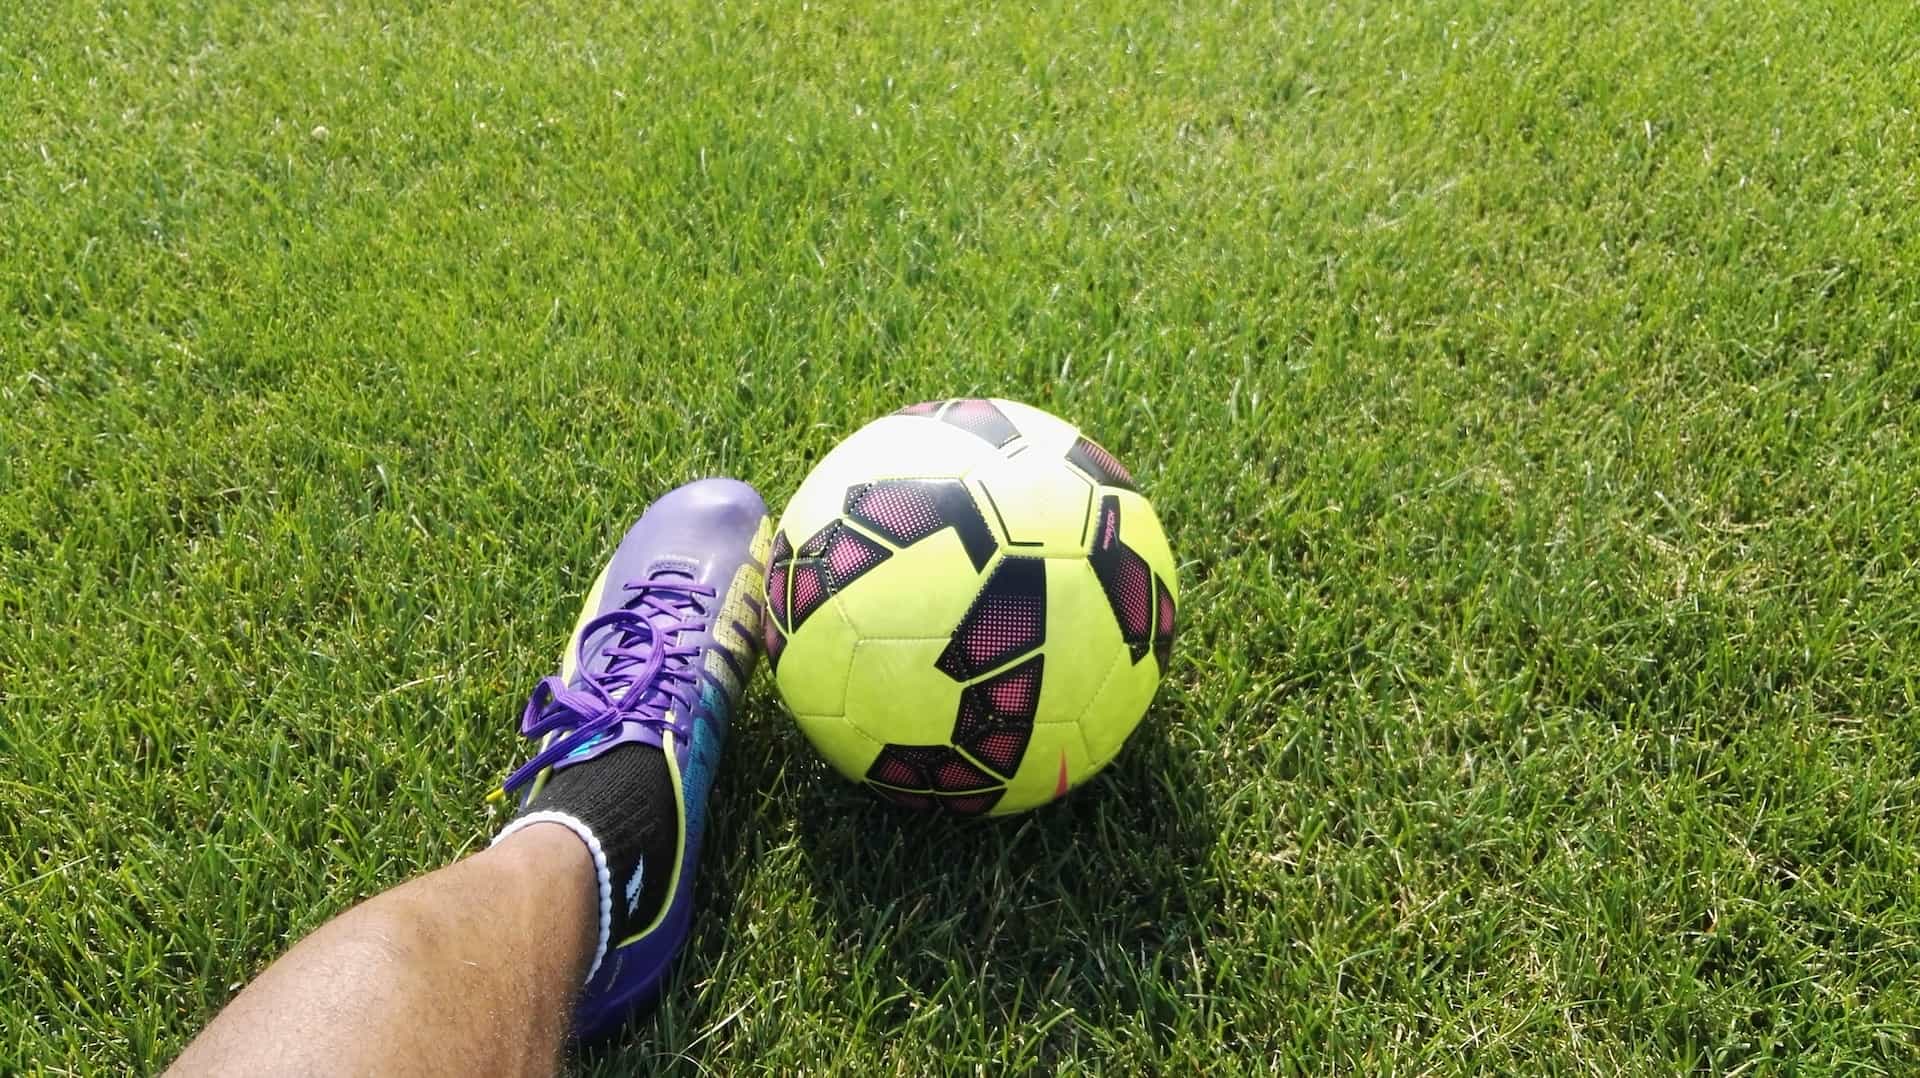 A football being kicked on the field